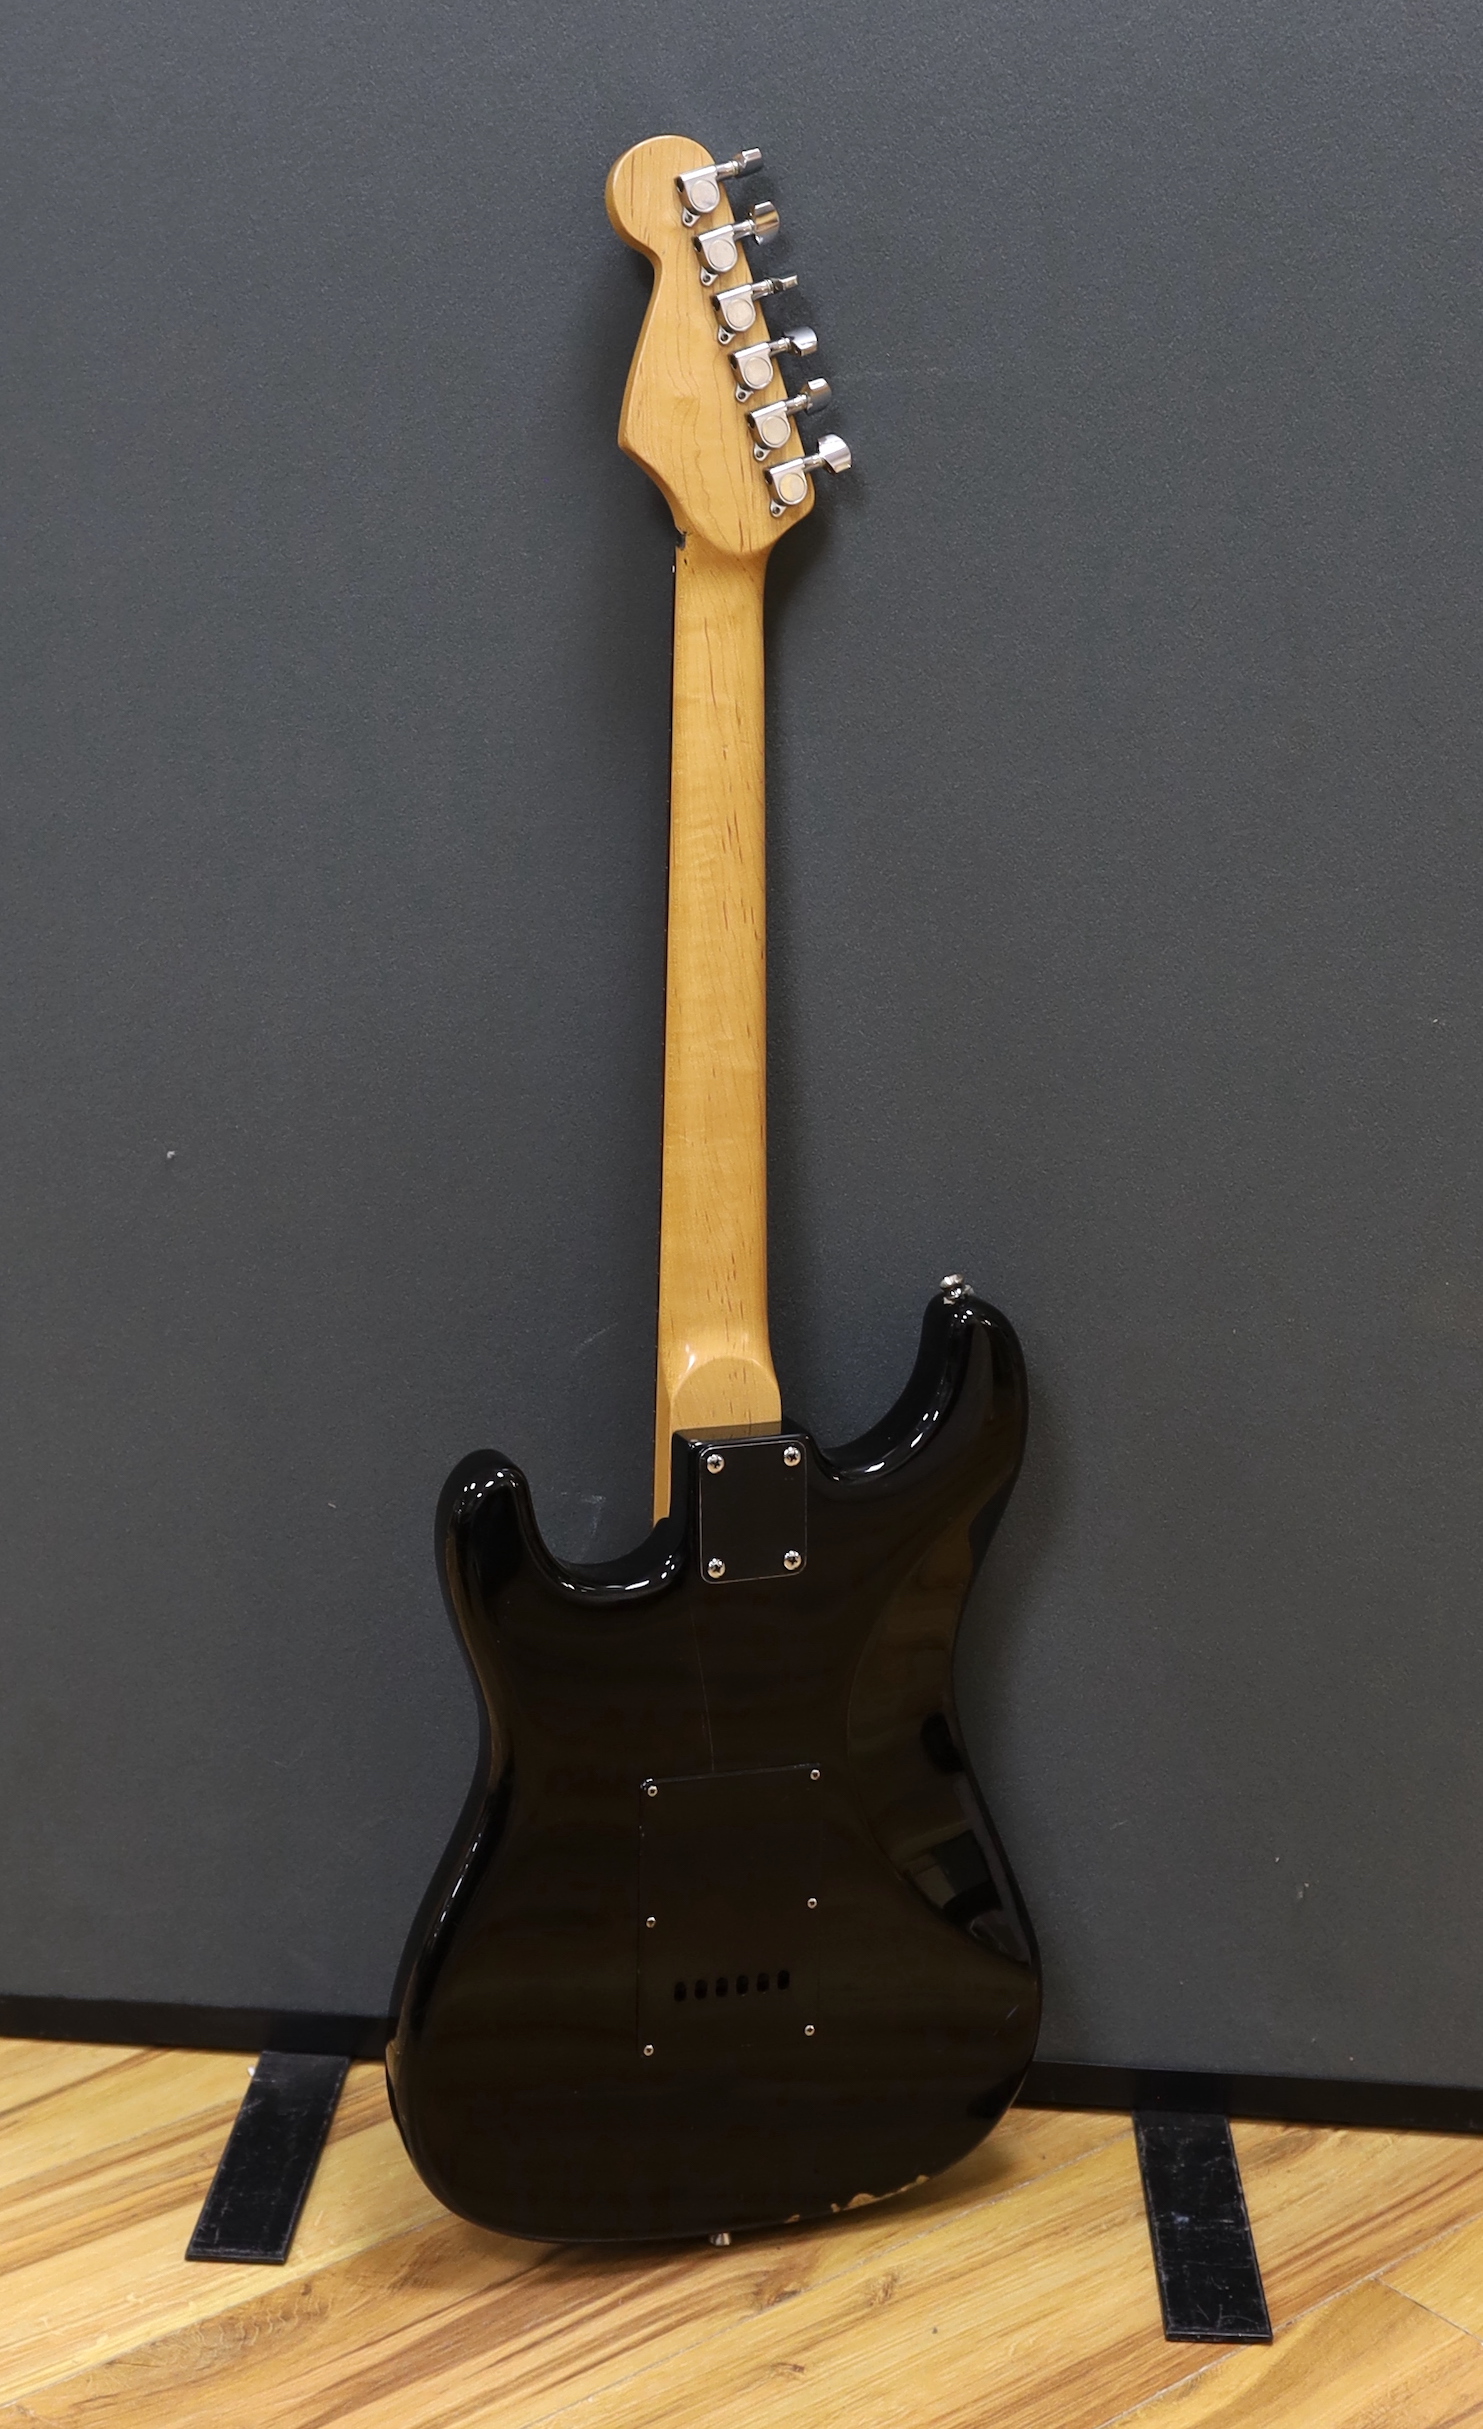 A cased Squier Strat by Fender electric guitar with rosewood neck and balance lacquer body, together with a Harris Tweed flight case